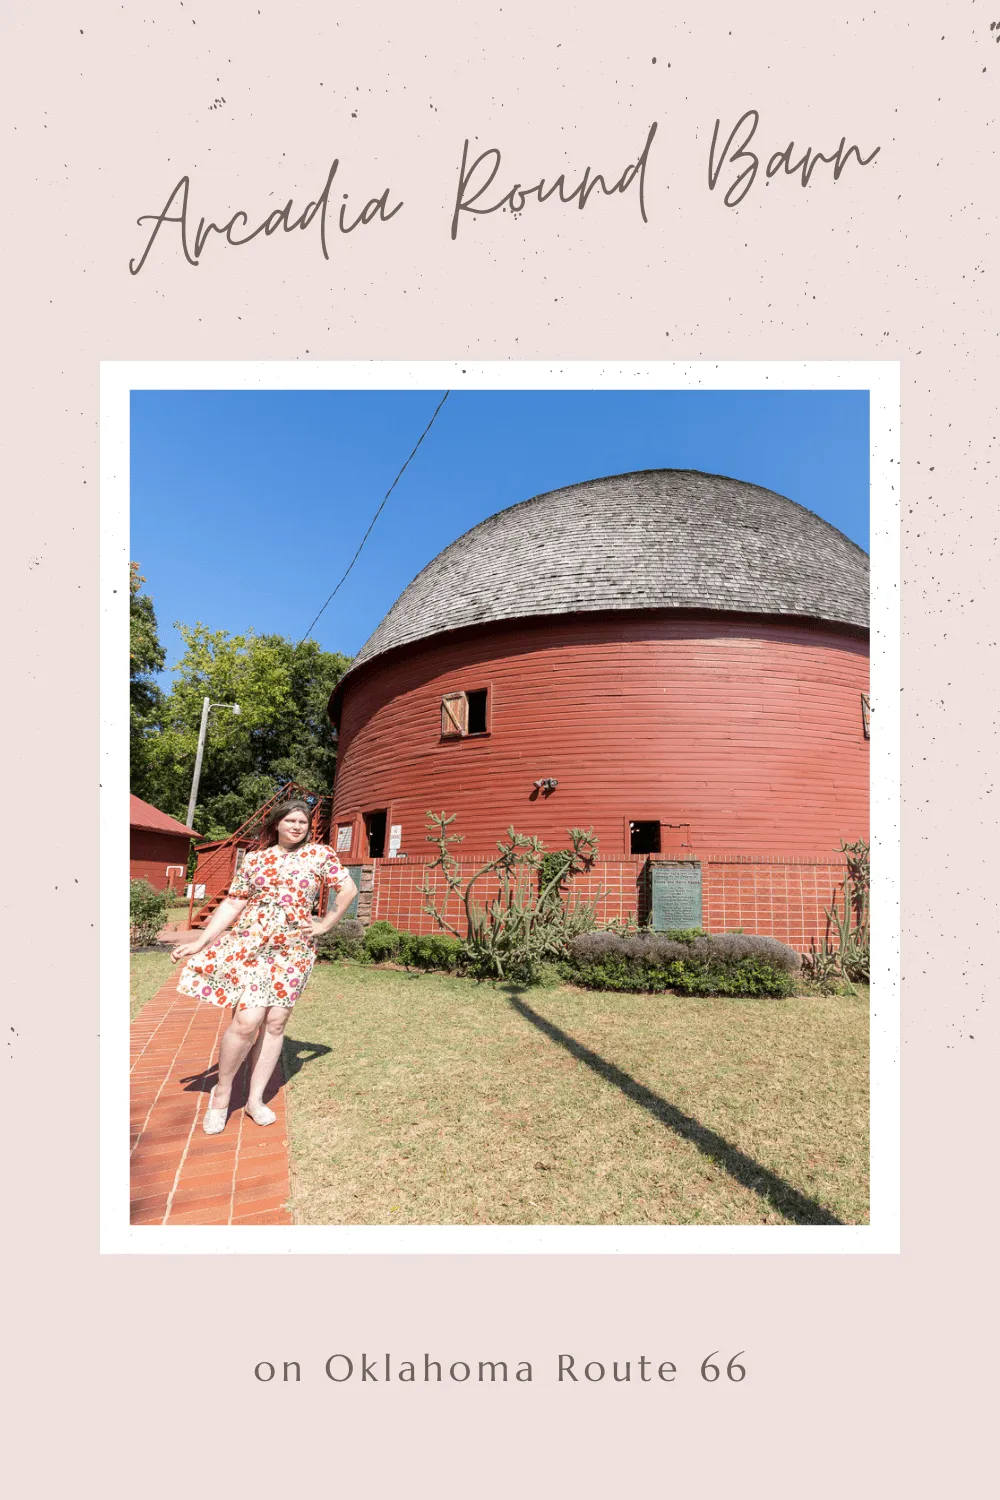 Traveling Route 66? One of the most iconic Route 66 stops is an unlikely attraction that comes in an unlikely shape: Arcadia Round Barn in Oklahoma. Add this roadside attraction to your travel itinerary to visit on a Route 66 road trip through Oklahoma.  #RoadTrips #RoadTripStop #Route66 #Route66RoadTrip #OklahomaRoute66 #Oklahoma #OklahomaRoadTrip #OklahomaRoadsideAttractions #RoadsideAttractions #RoadsideAttraction #RoadsideAmerica #RoadTrip